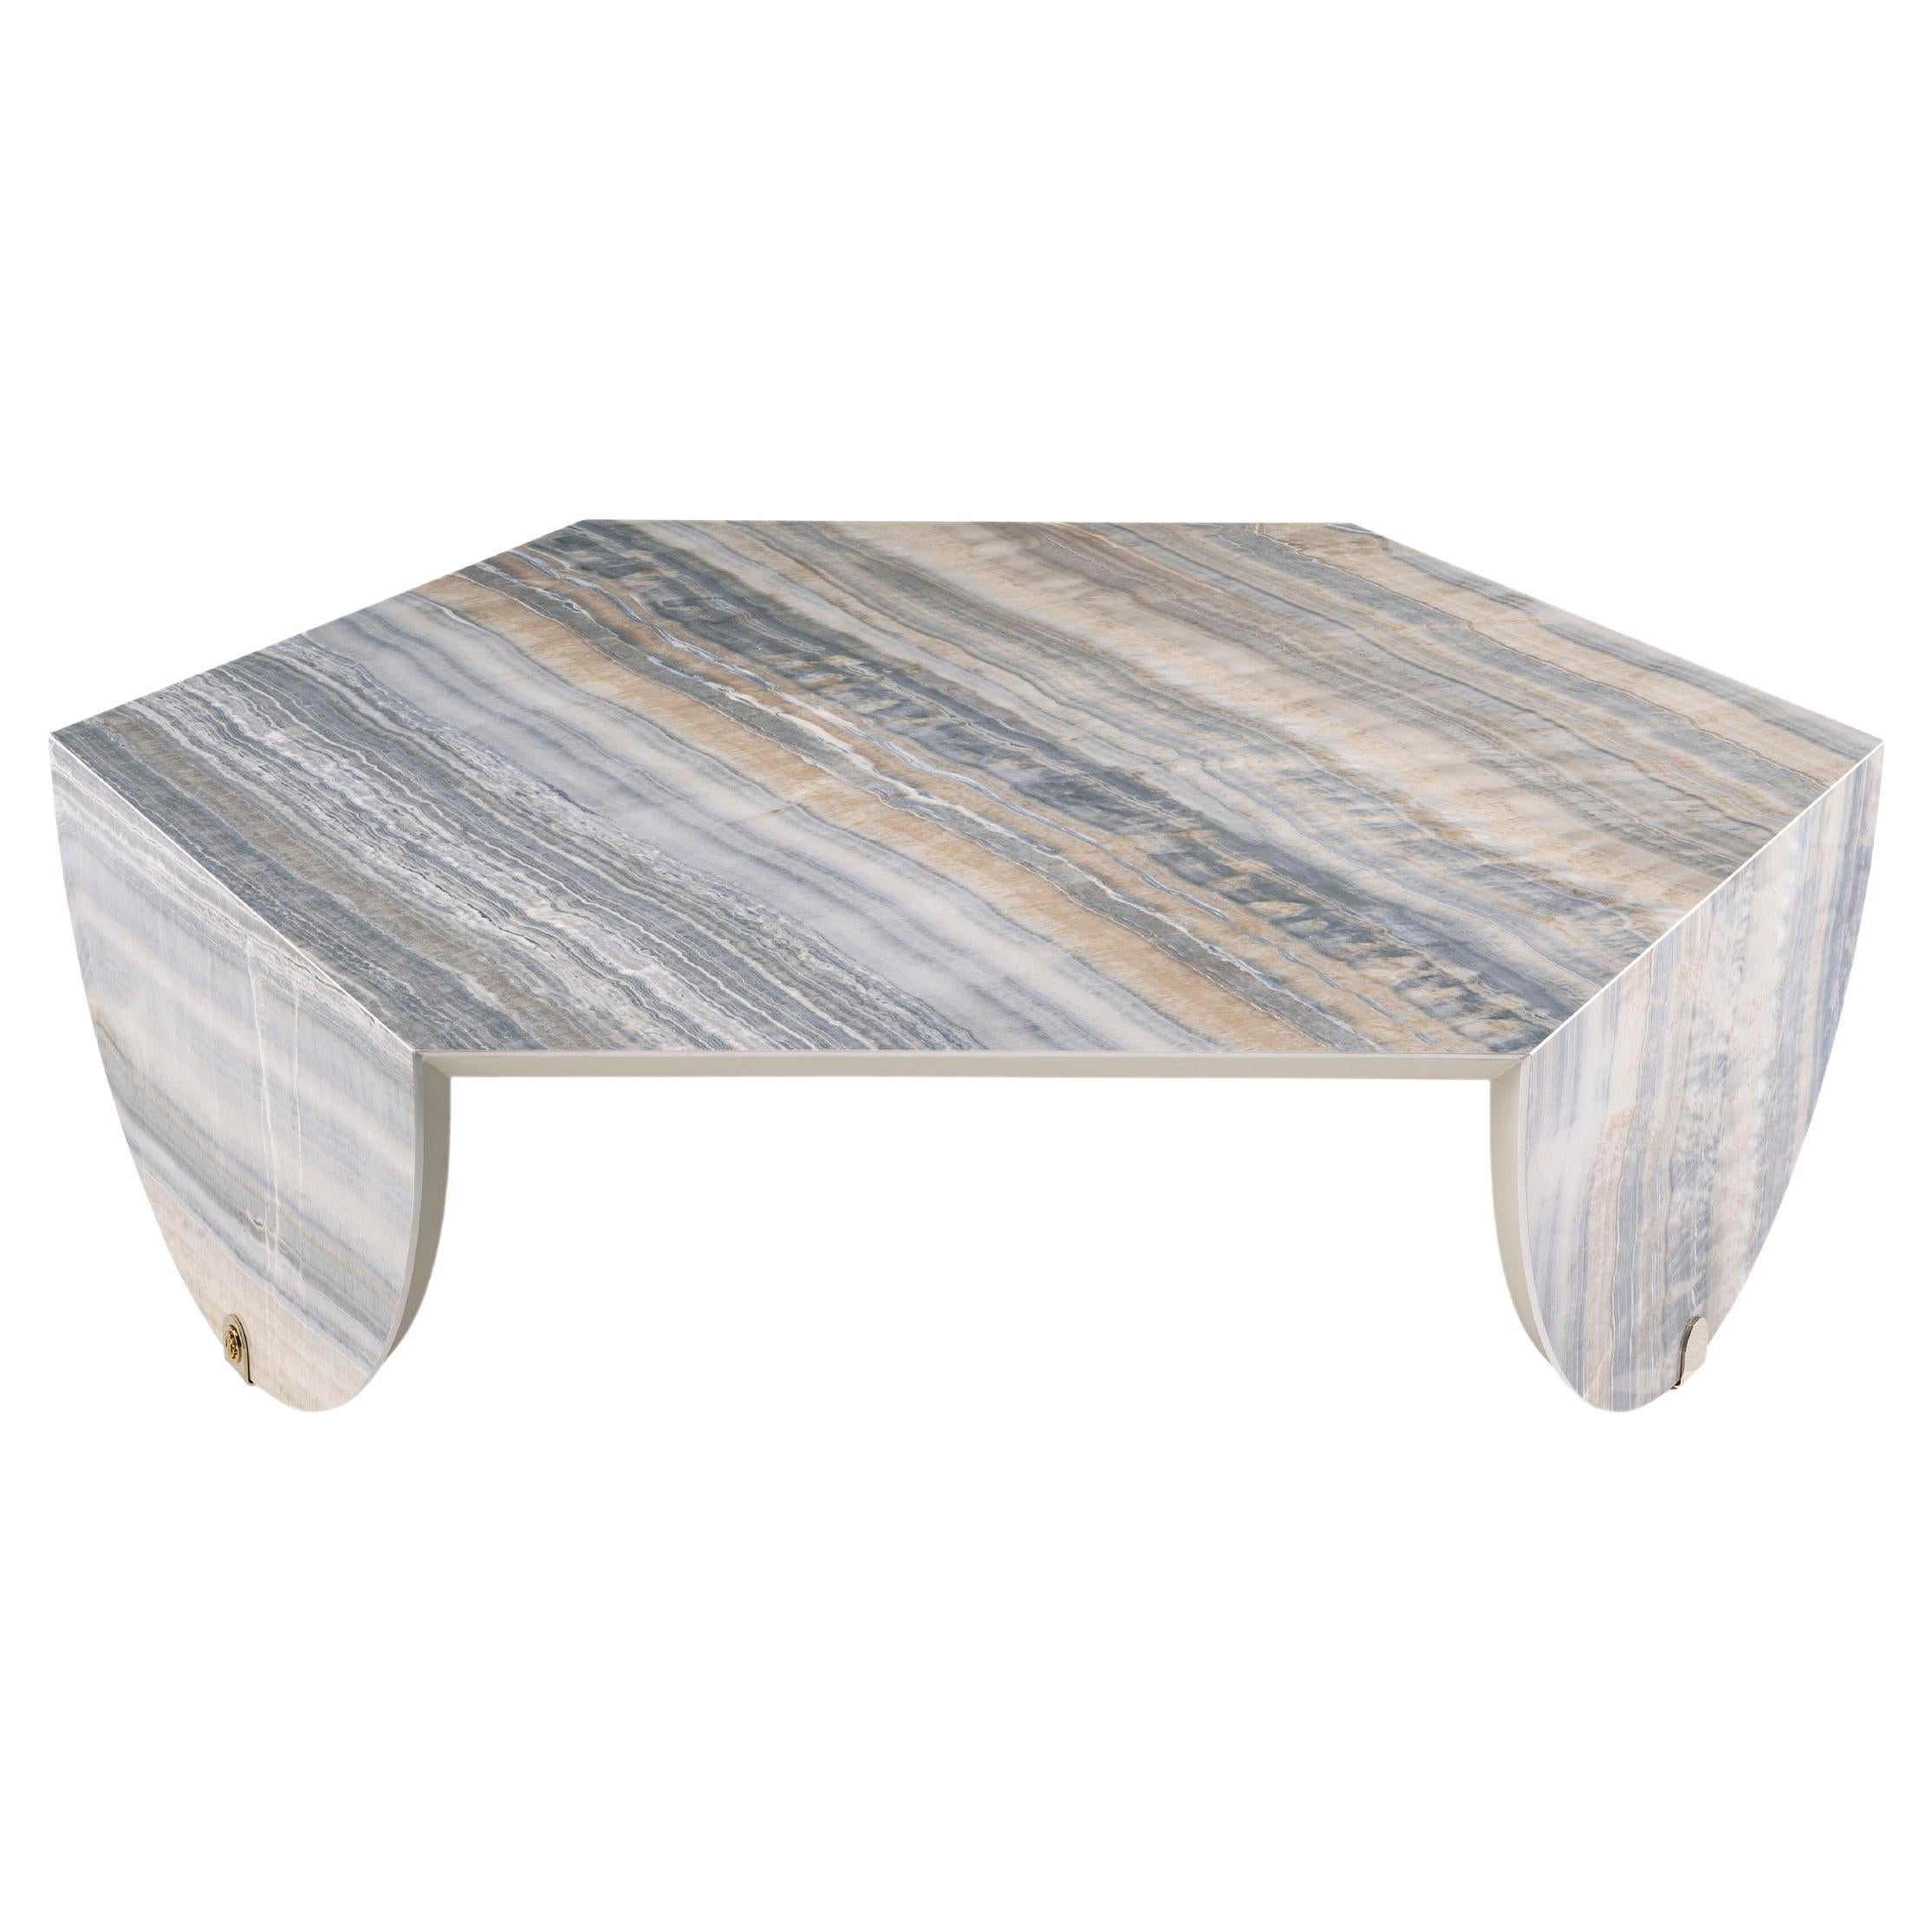 21st Century Inagua Central Table in Grey Gres by Roberto Cavalli Home Interiors For Sale